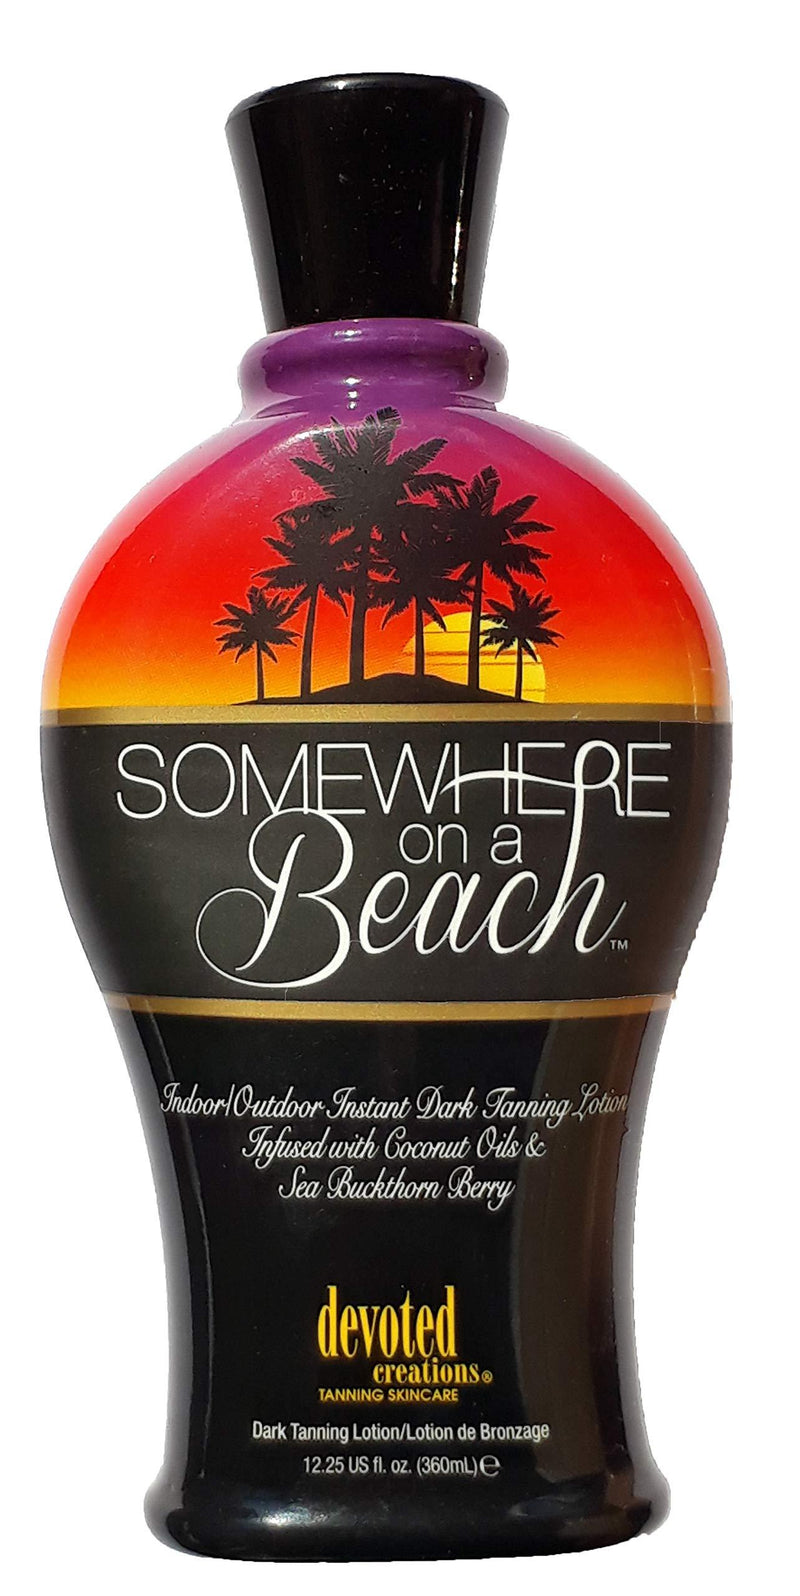 [Australia] - Somewhere on a Beach, Indoor Outdoor, Instant Dark Tanning Lotion 12.25 Ounce 